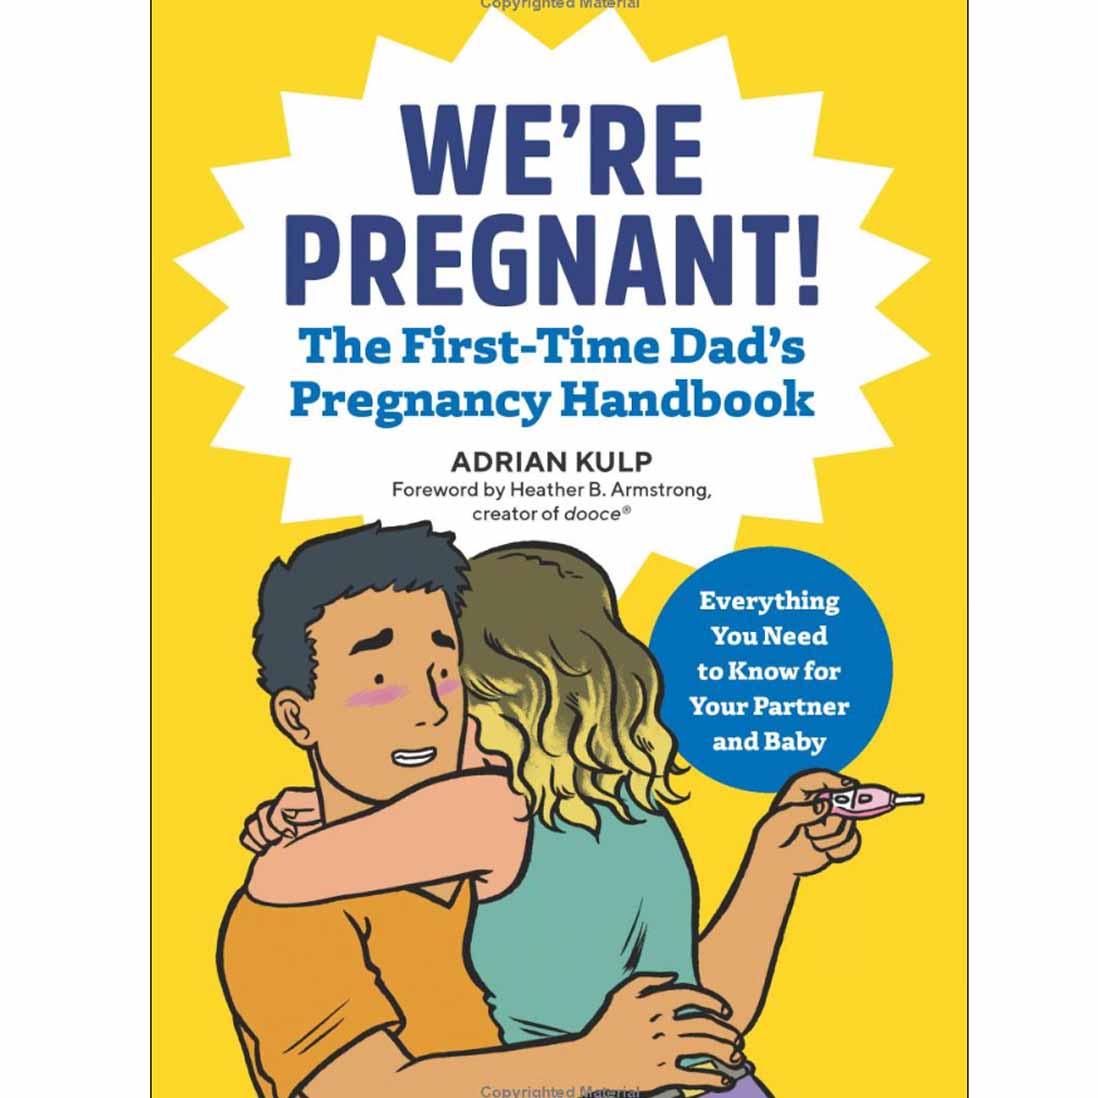 Book cover in yellow and comic illustration for We're Pregnant! The First Time Dad's Pregnancy Handbook